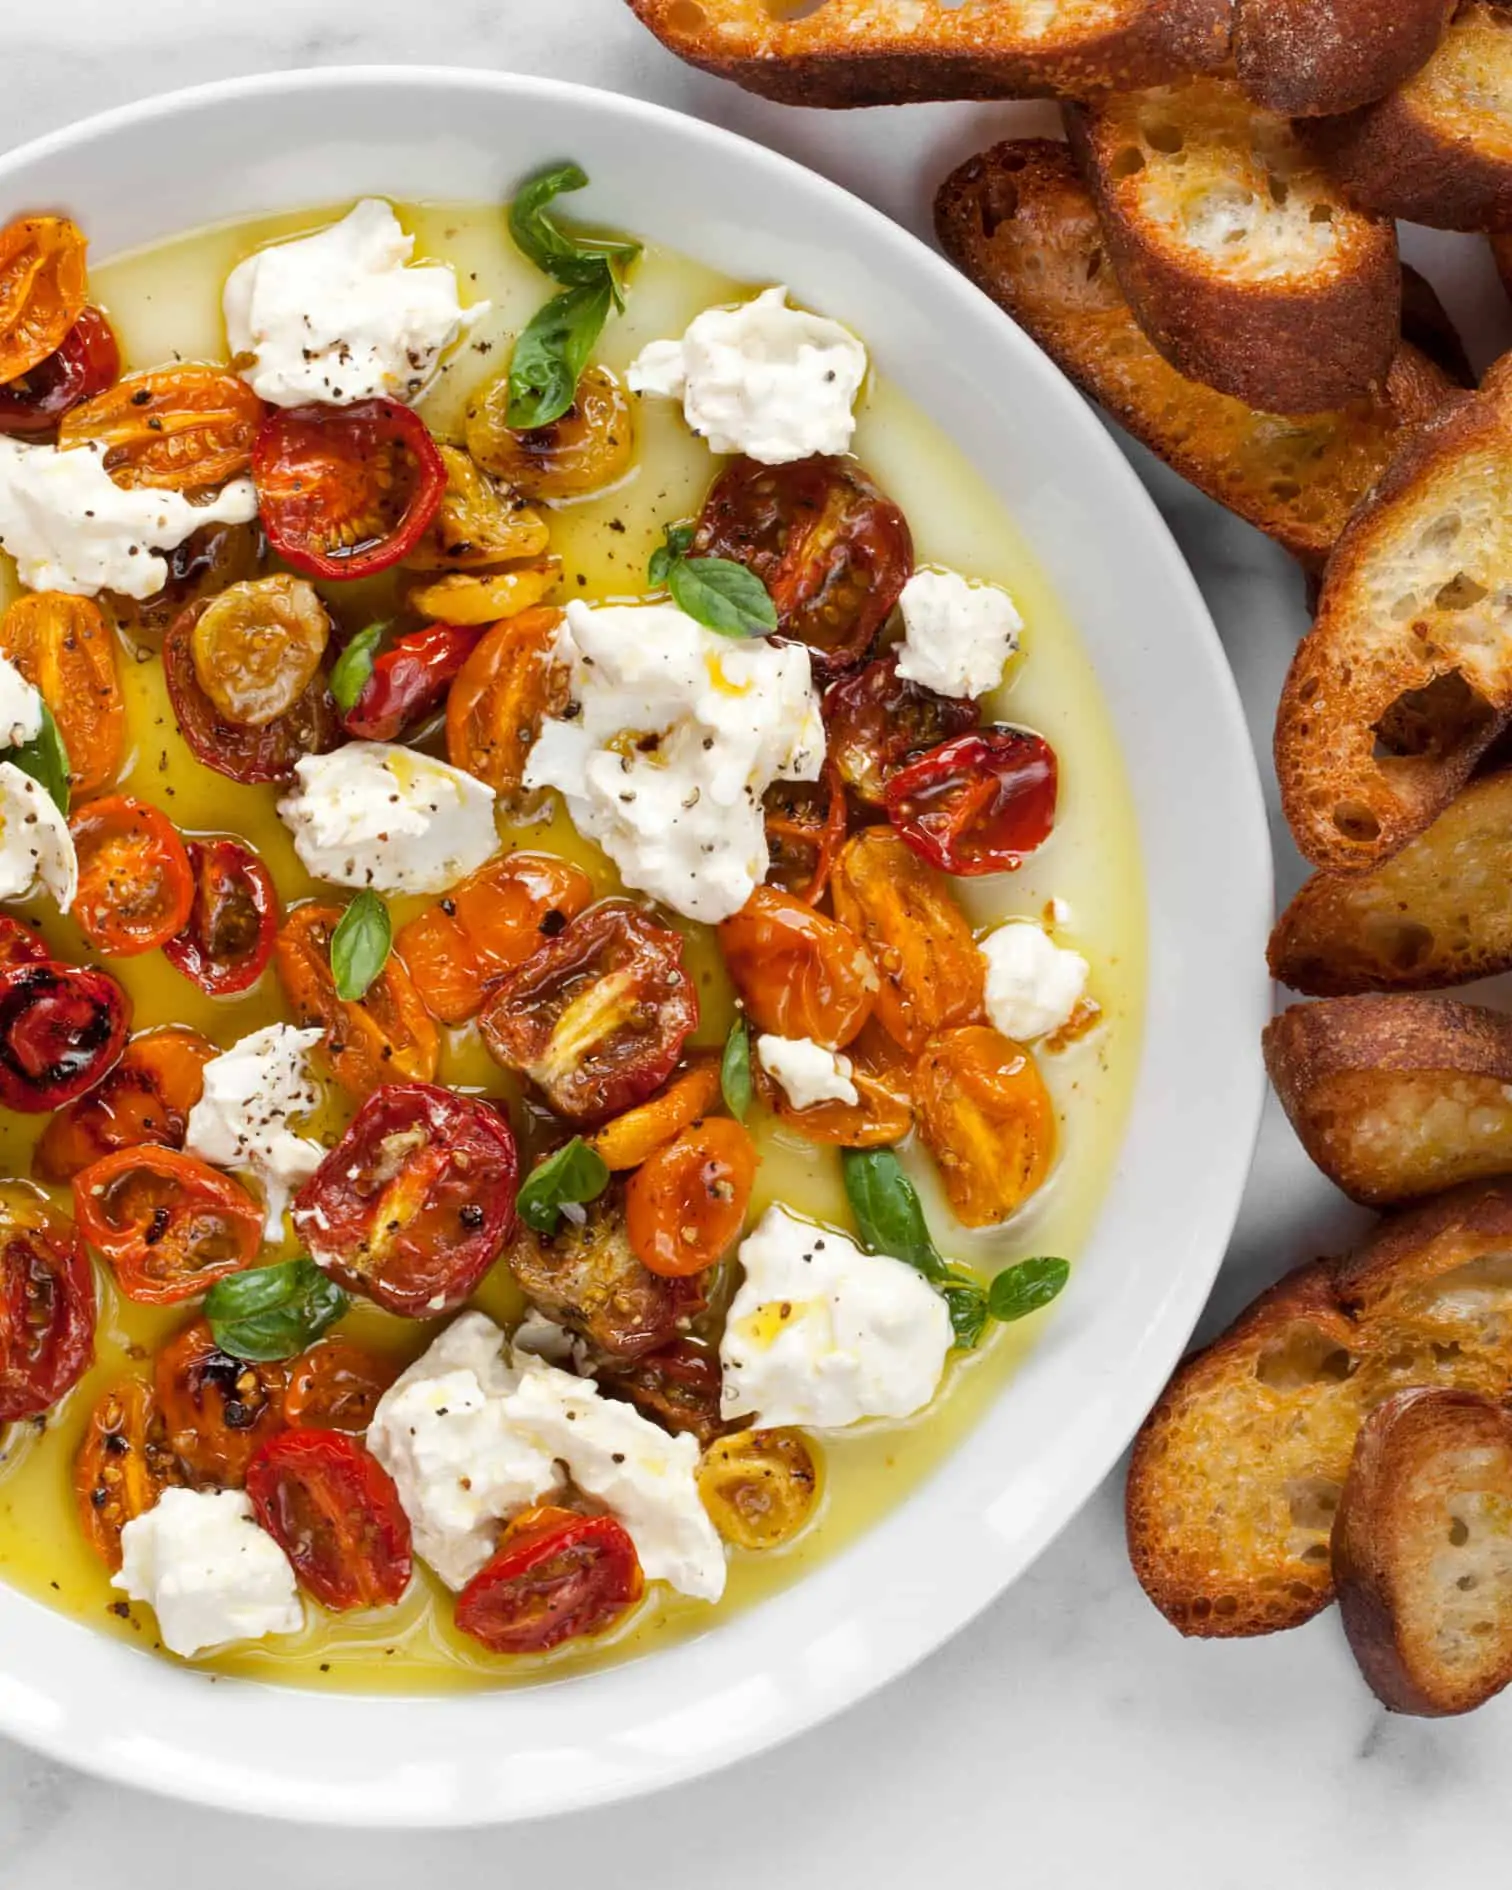 Burrata With Roasted Tomatoes